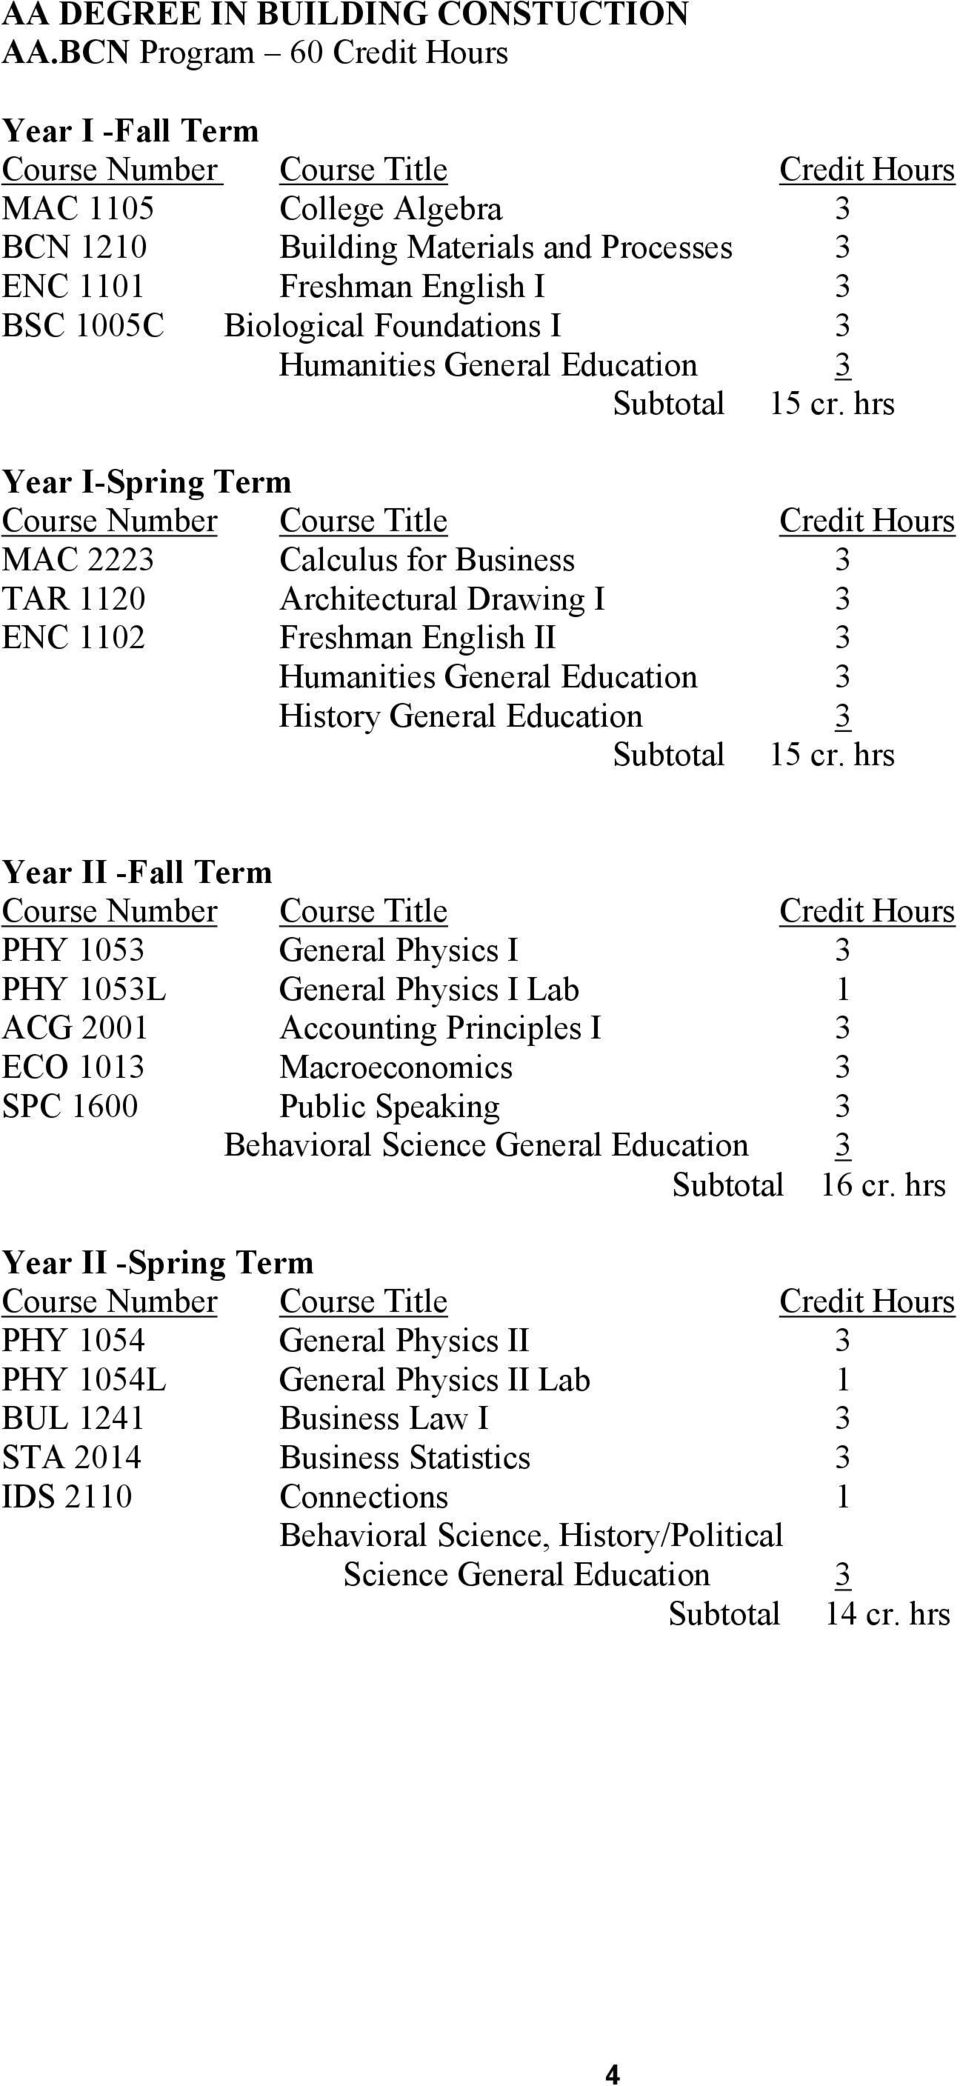 Term MAC 2223 Calculus for Business 3 TAR 1120 Architectural Drawing I 3 ENC 1102 Freshman English II 3 History General Education 3 Year II -Fall Term PHY 1053 General Physics I 3 PHY 1053L General